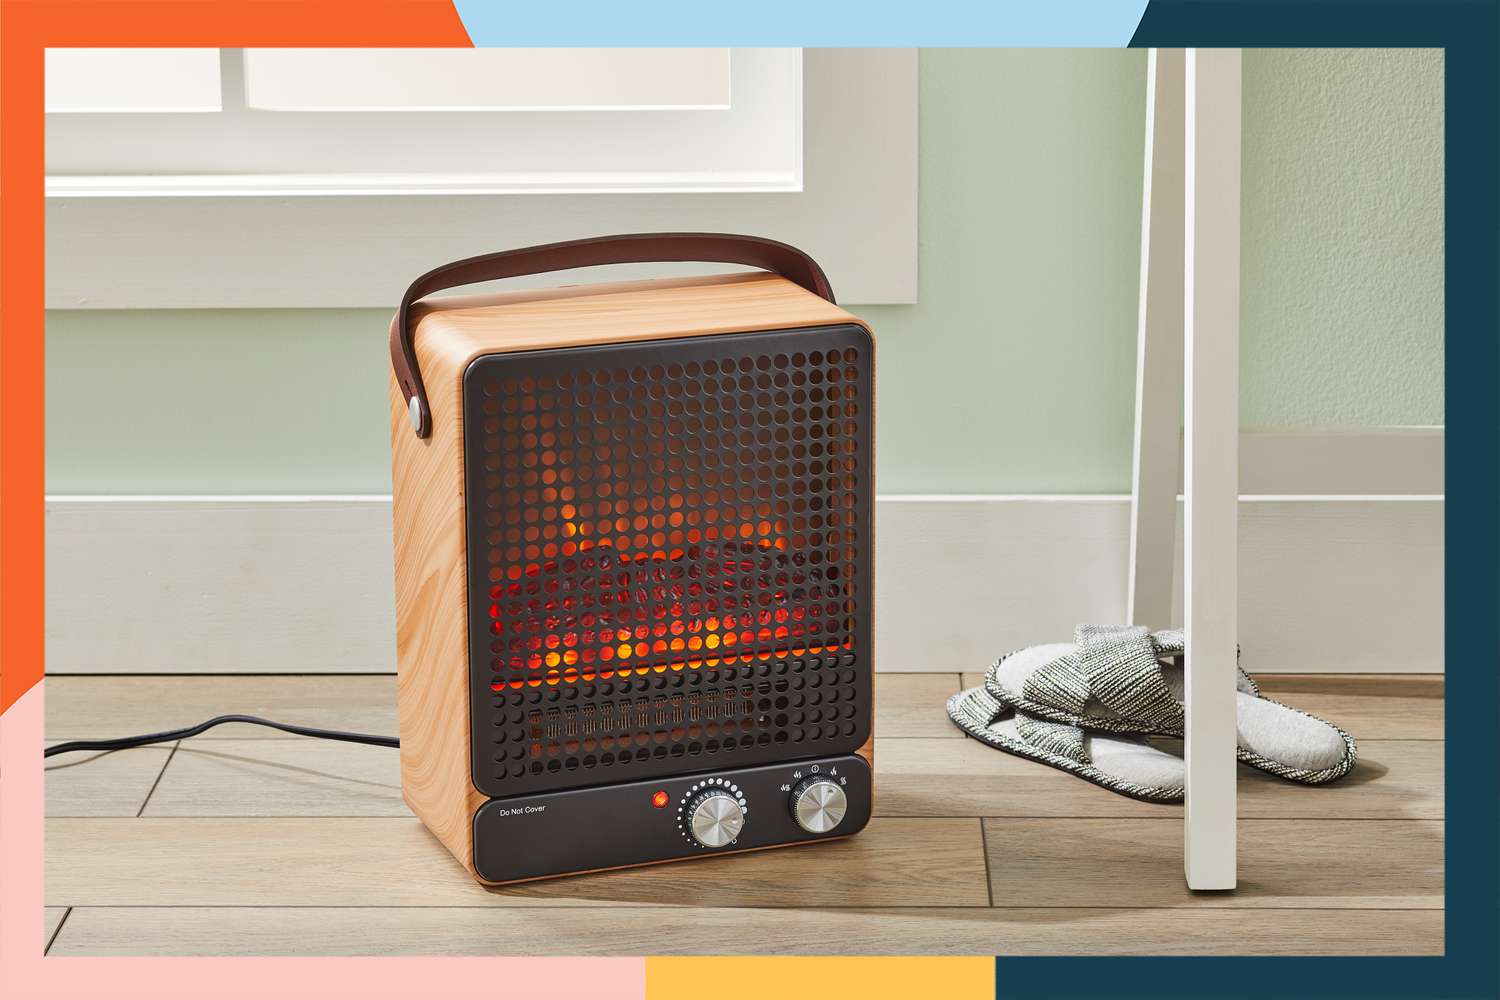 Which Type Of Heater Is Cheapest To Run